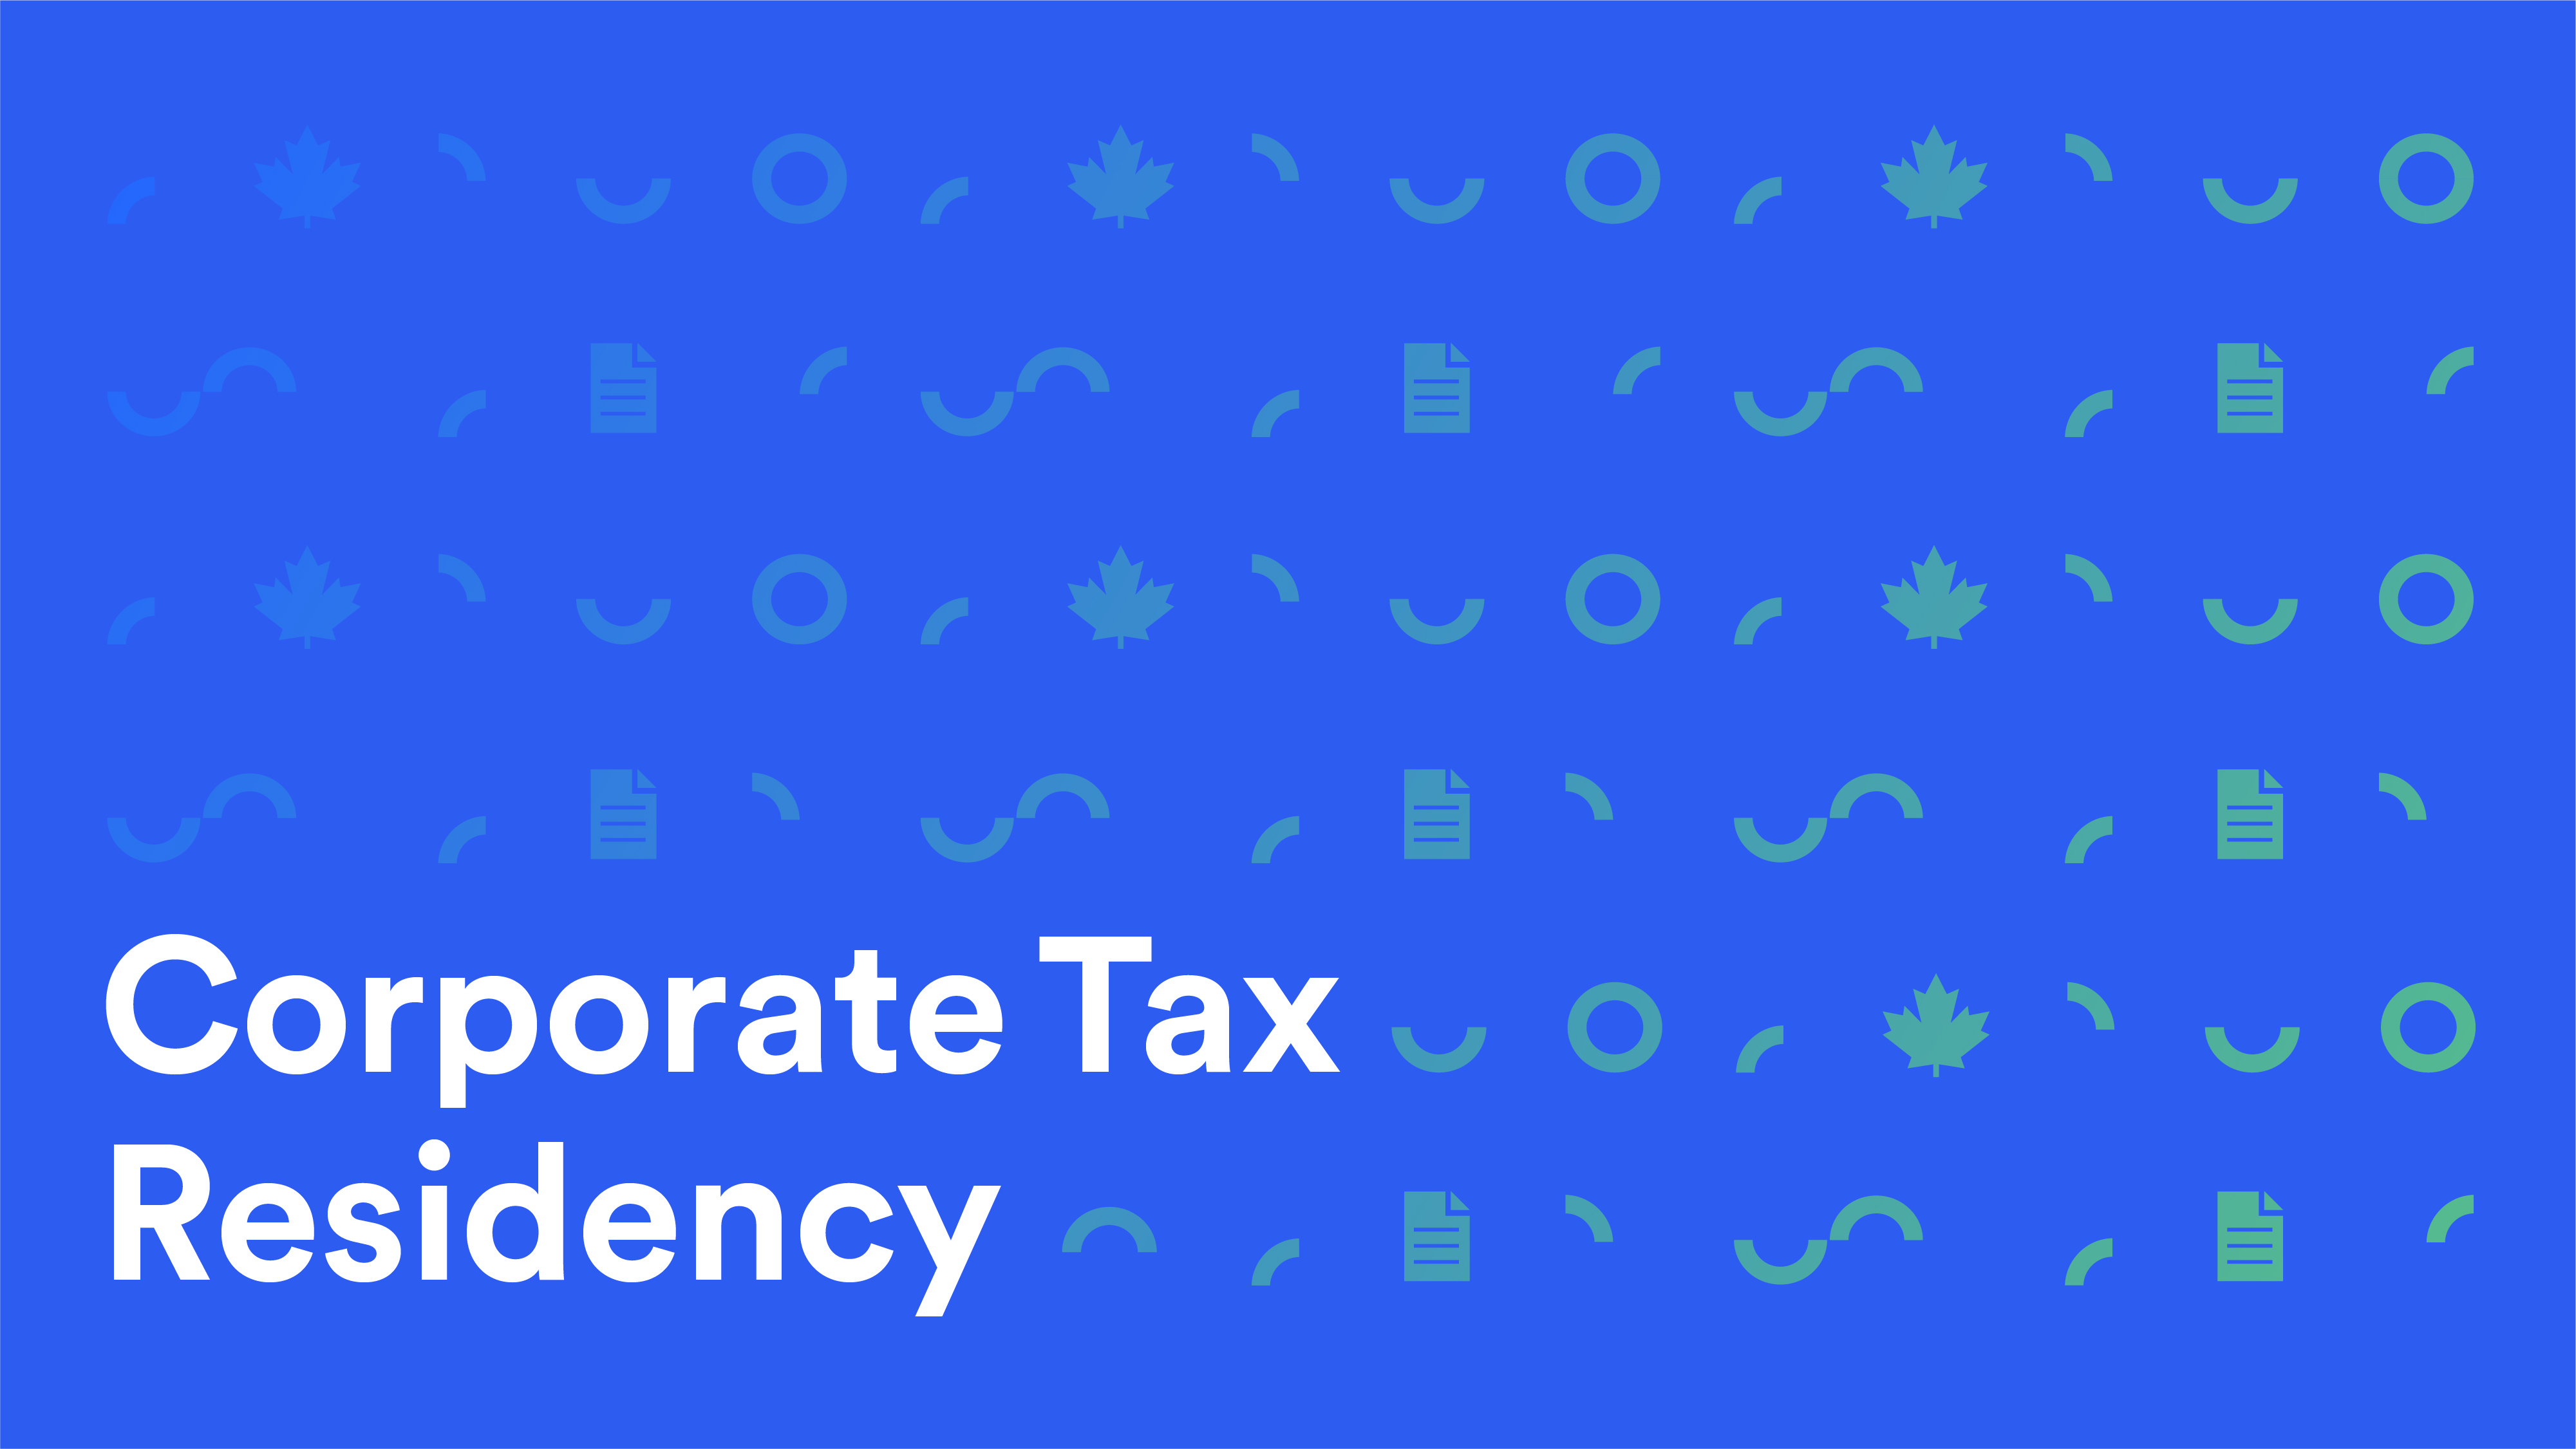 The Concepts of Central Management & Control: Corporate Tax Residency